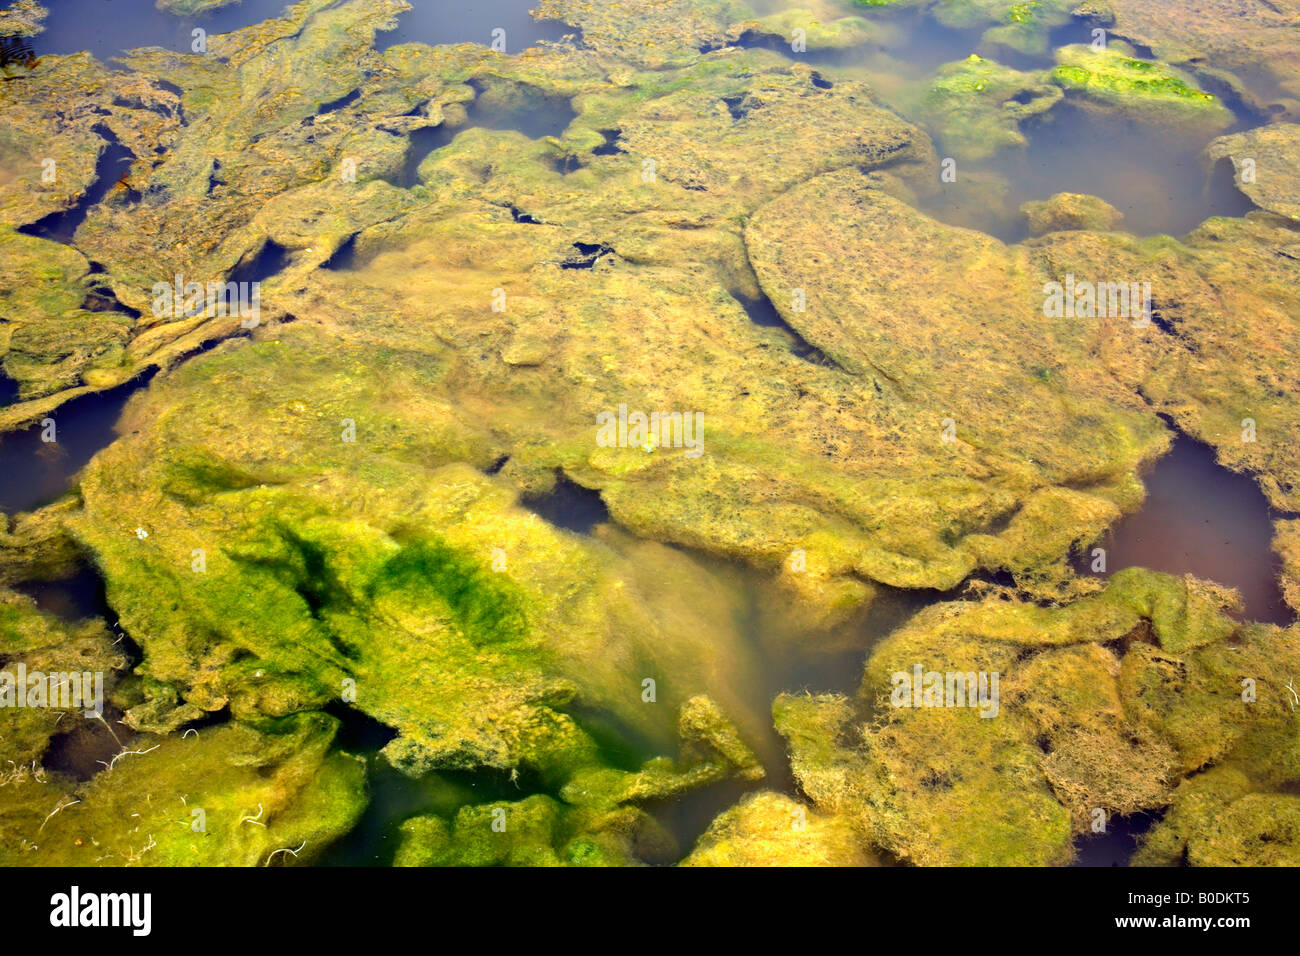 Filamentous algae growing in a polluted pool Stock Photo